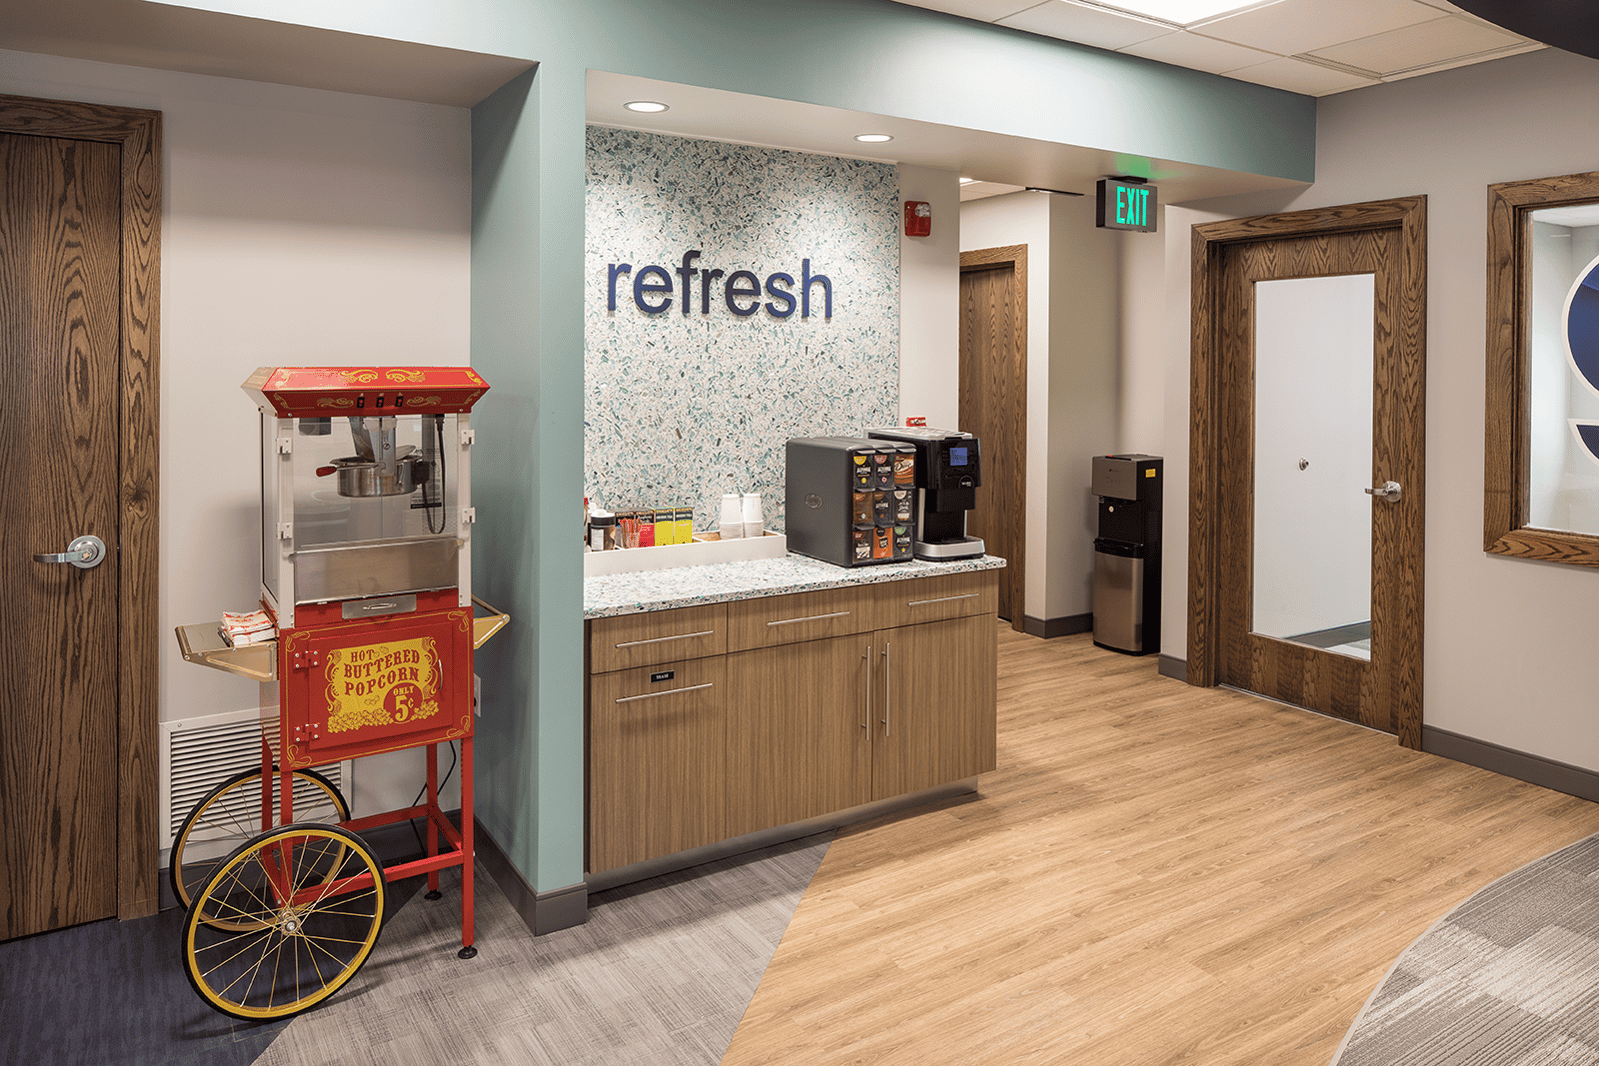 Refreshment station in a credit union